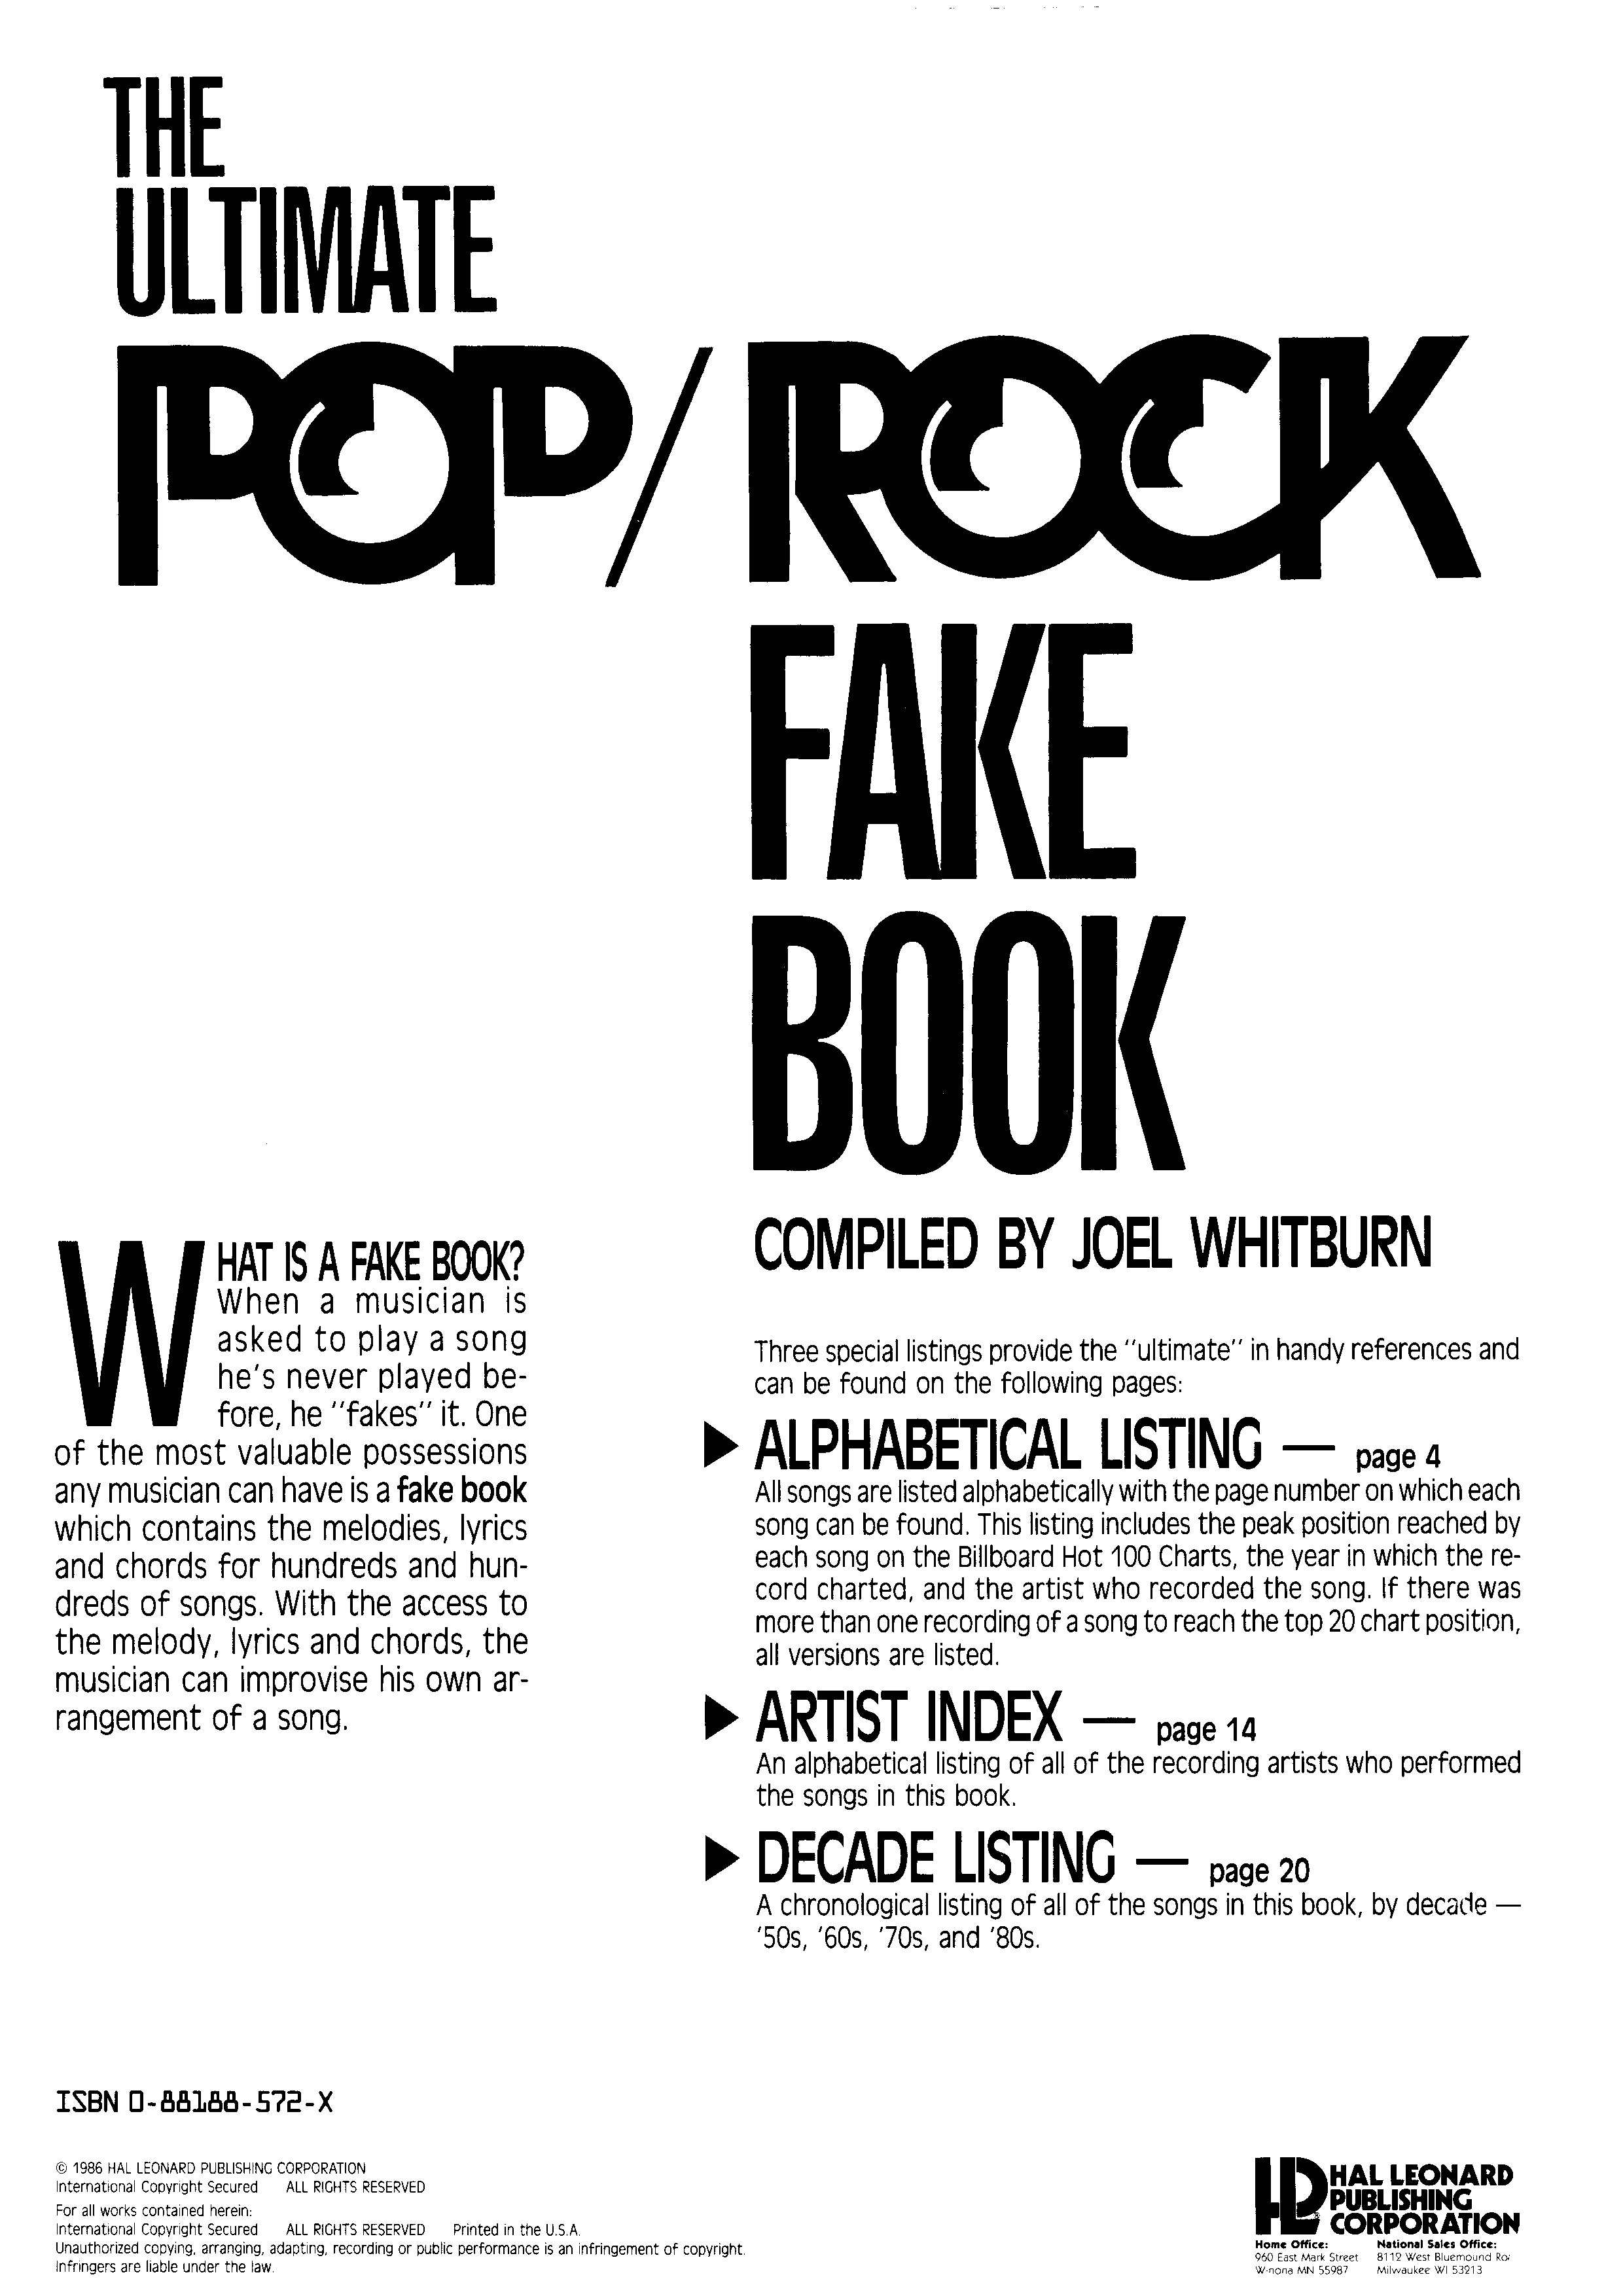 The Ultimate Pop/Rock Fake Book 336 Pagesピアノ譜